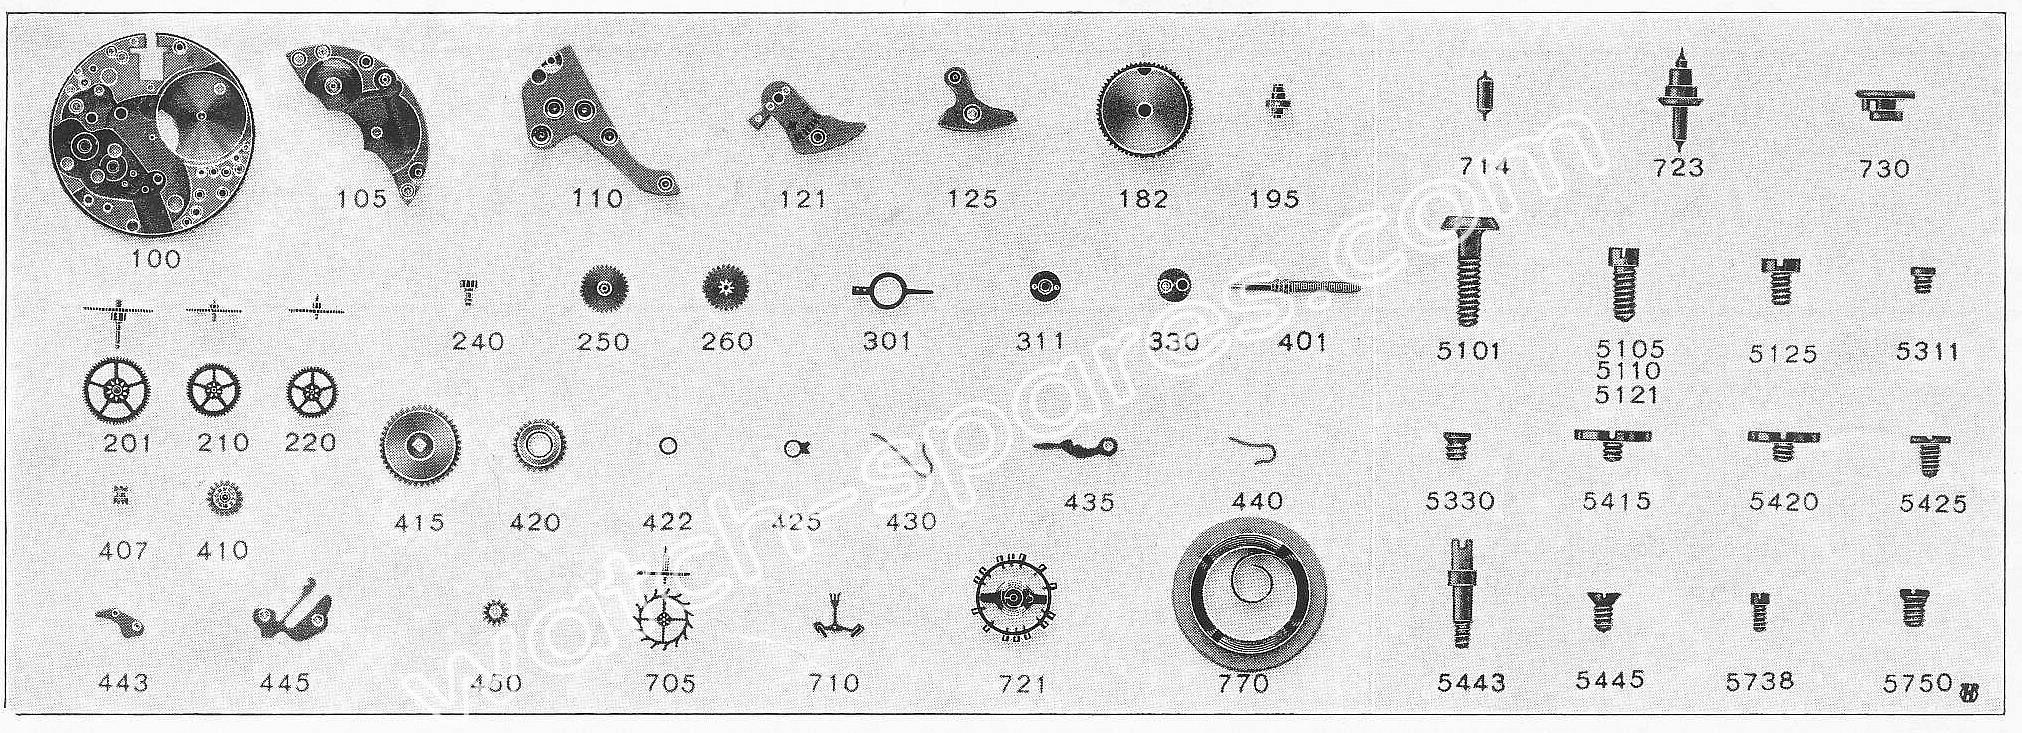 AS 1001 watch parts